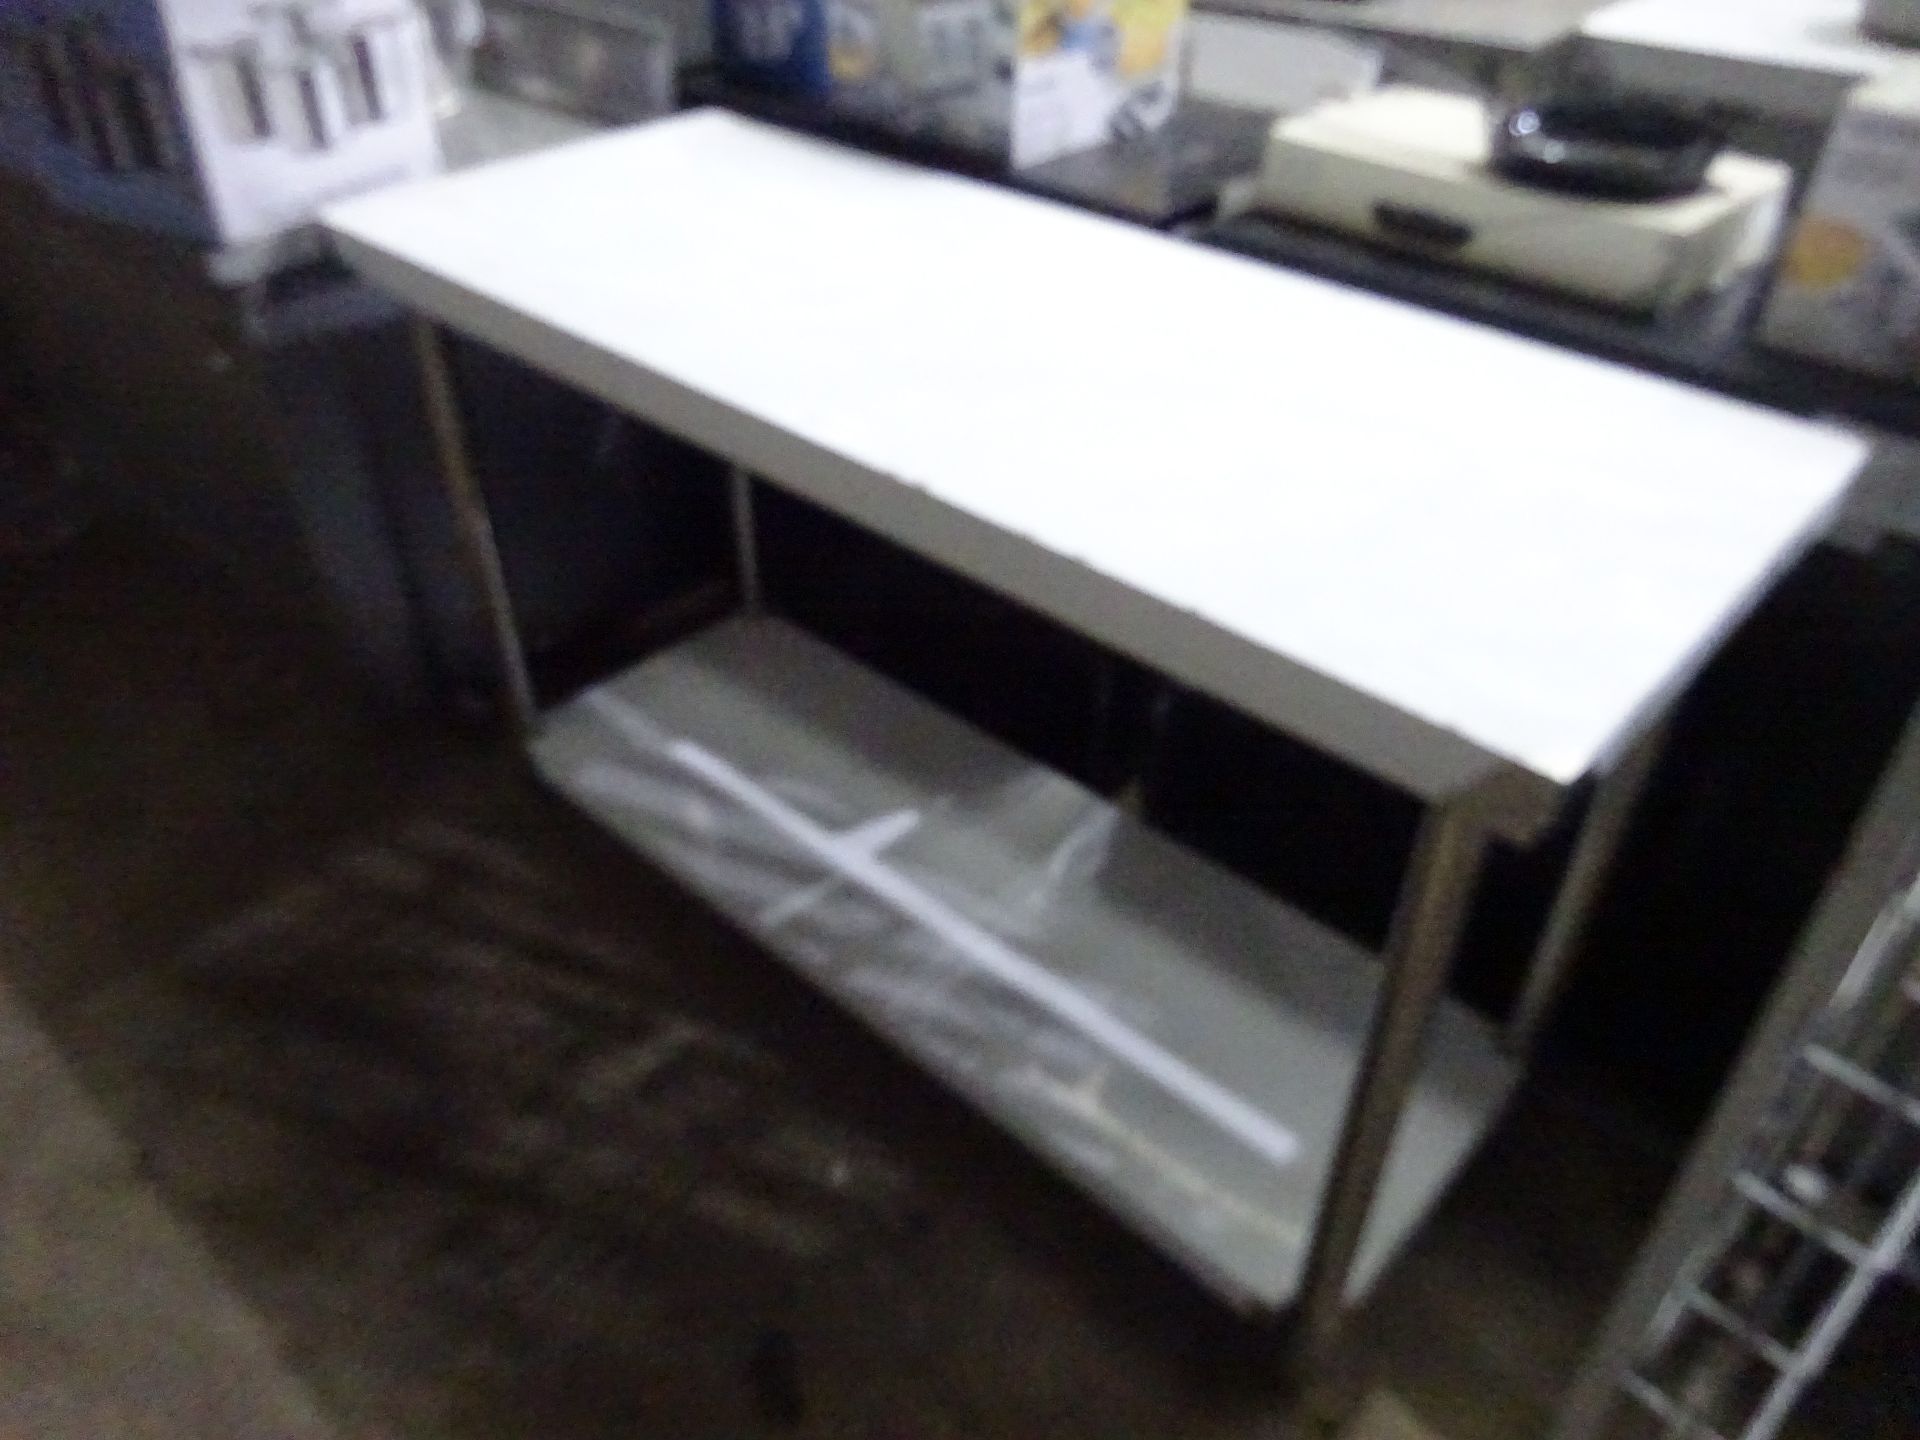 New stainless steel prep table with shelf, 150cms.